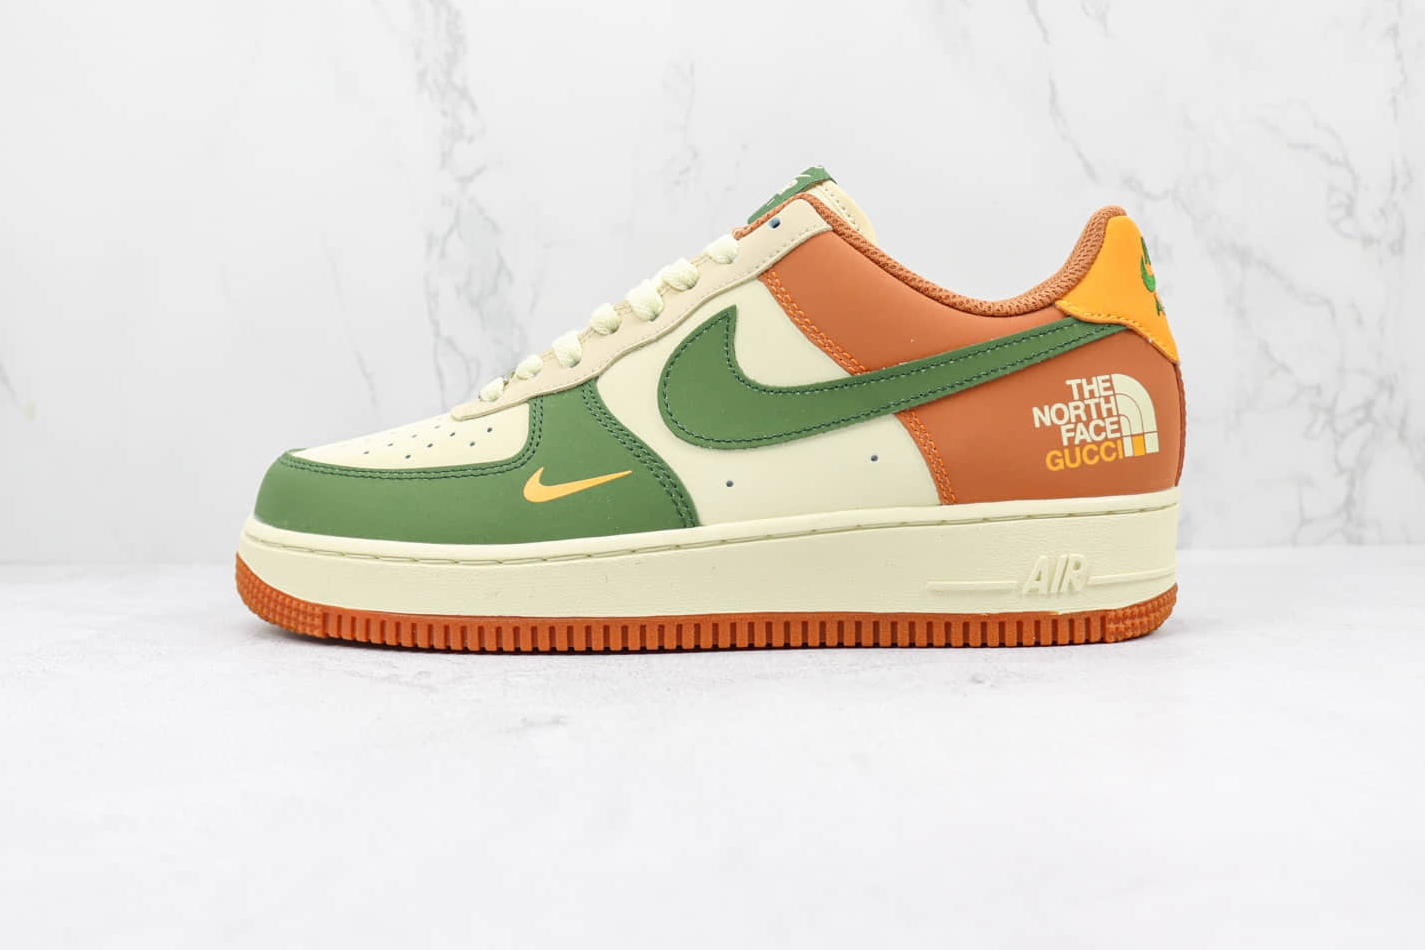 TheNorthFace x Nike Air Force 1 07 Low Orange Green Yellow BS9055-811 For the Ultimate Outdoor Style